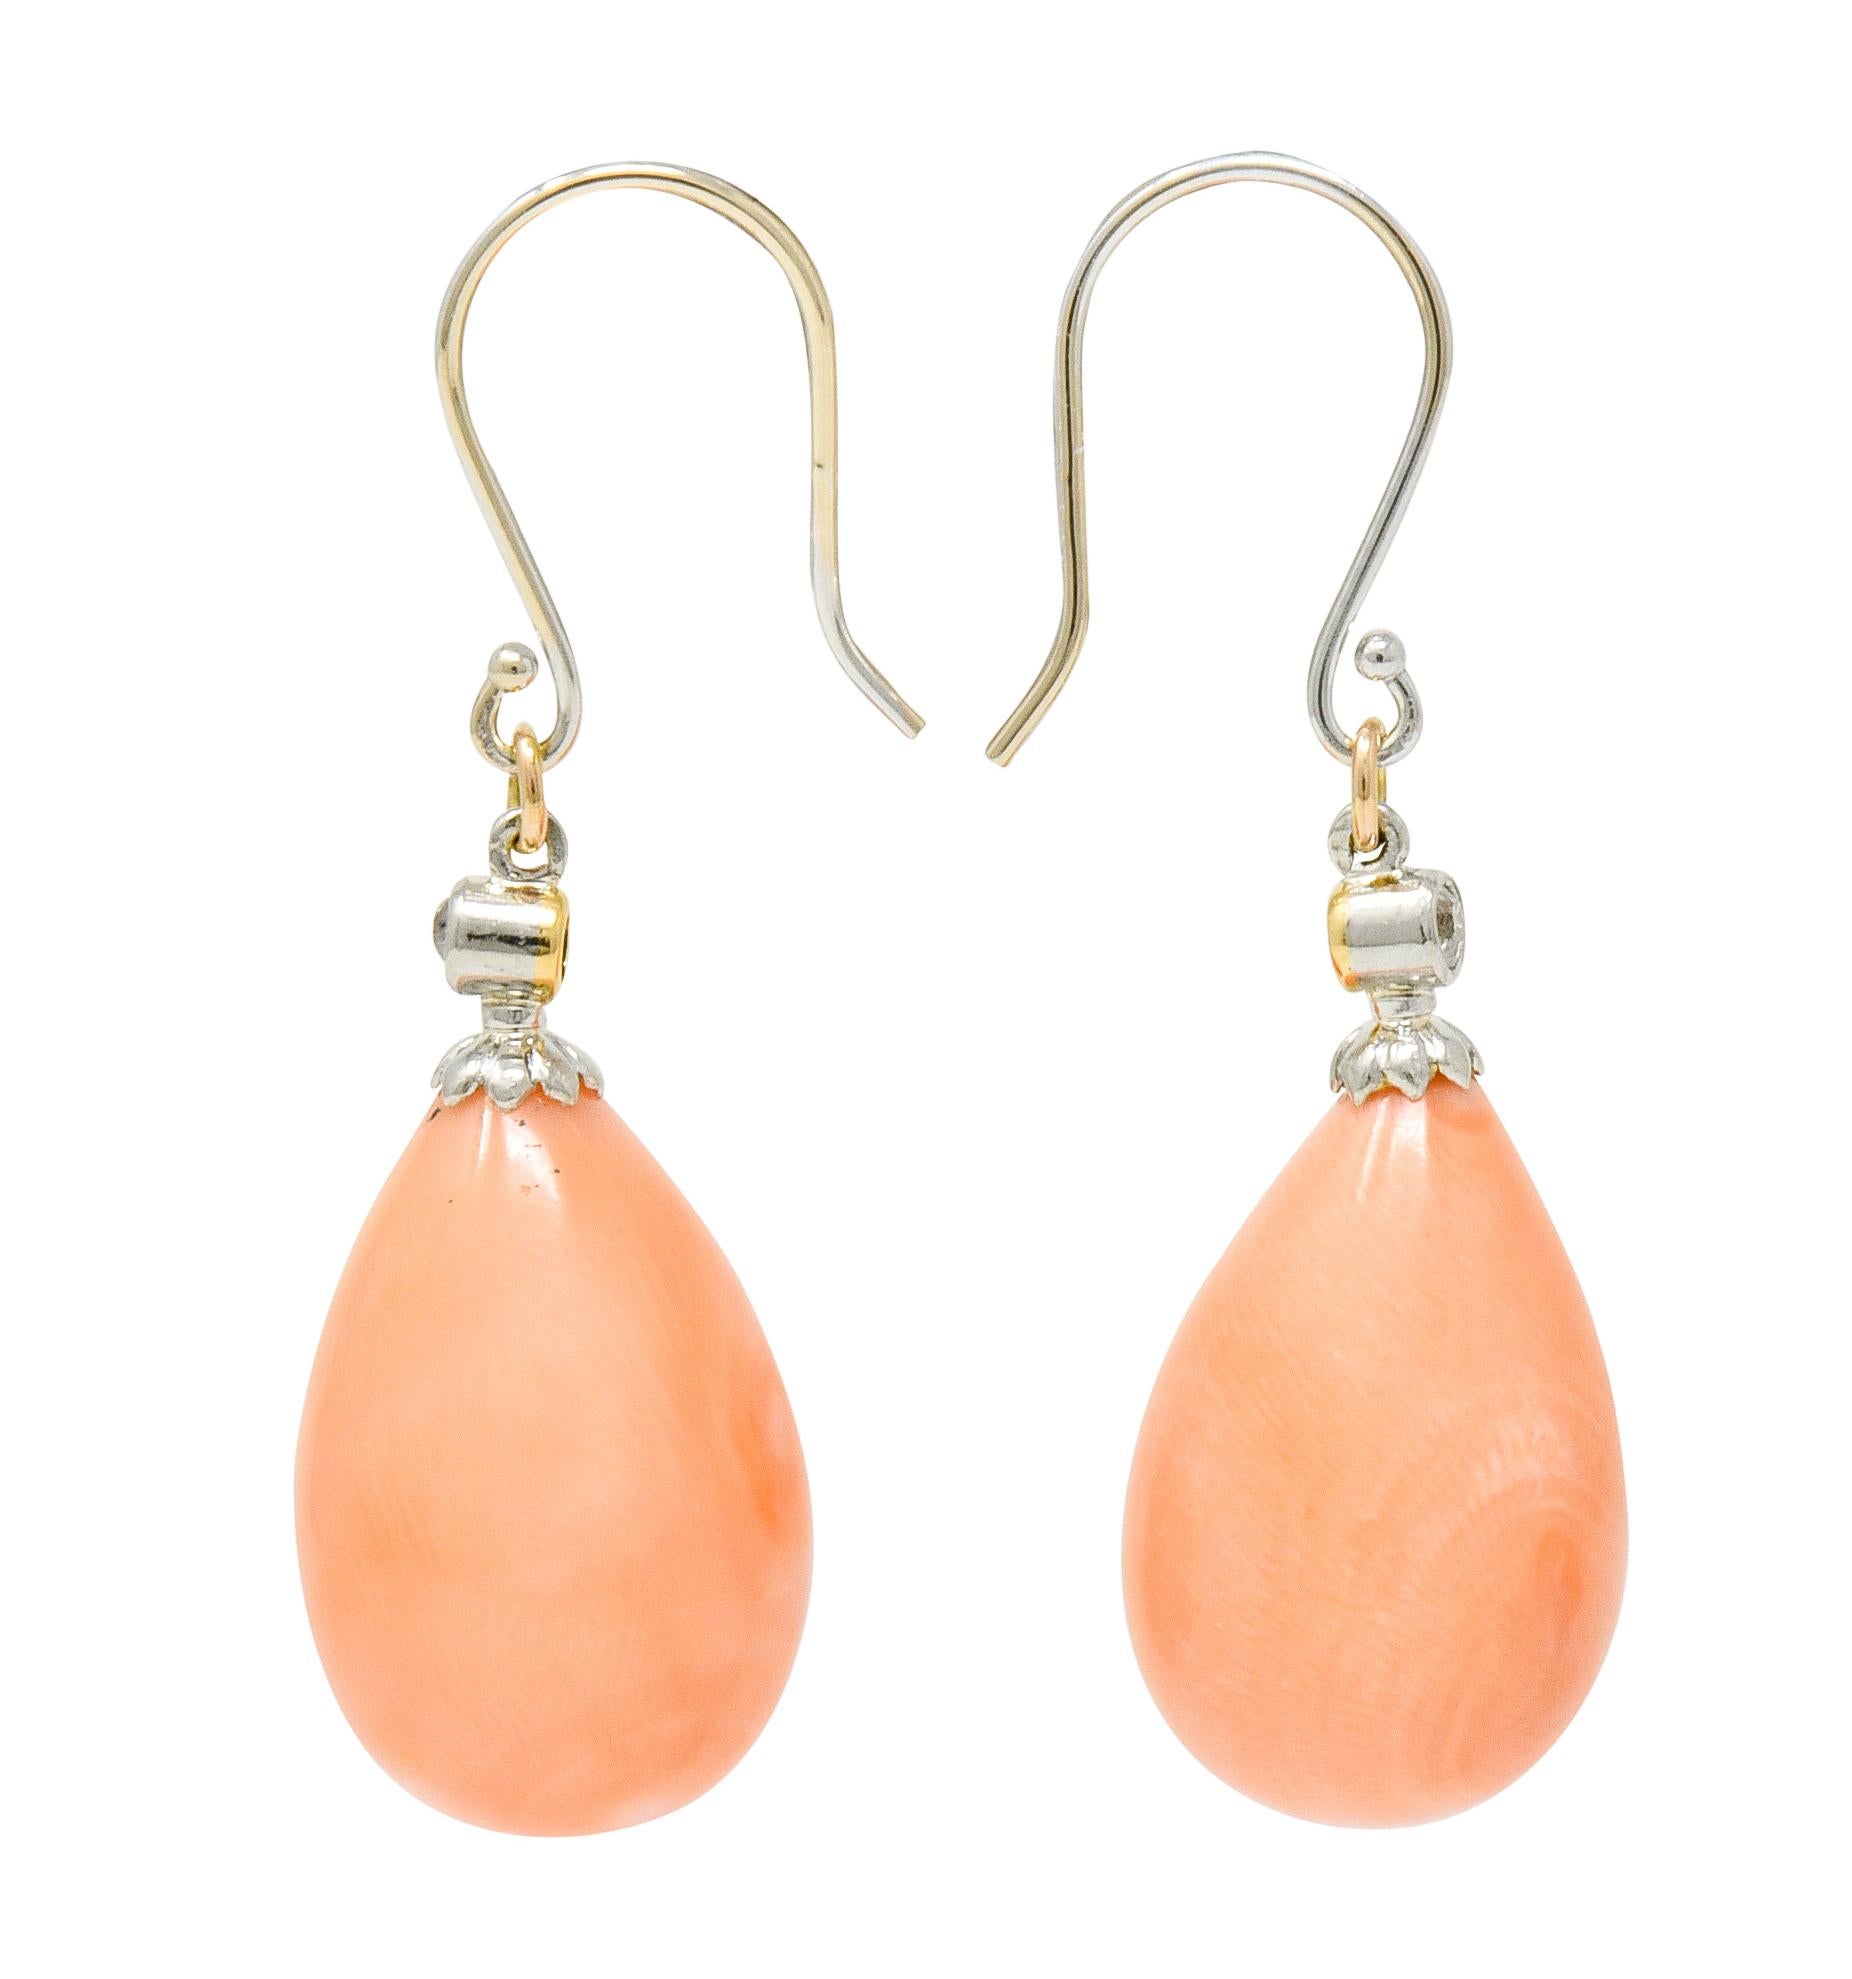 Earrings feature a bezel set old mine cut diamond as surmount with a scalloped cap

Total diamond weight is approximately 0.08 carat, eye-clean and white

Suspending substantial coral drops, very well-matched pastel orangey-pink in color with